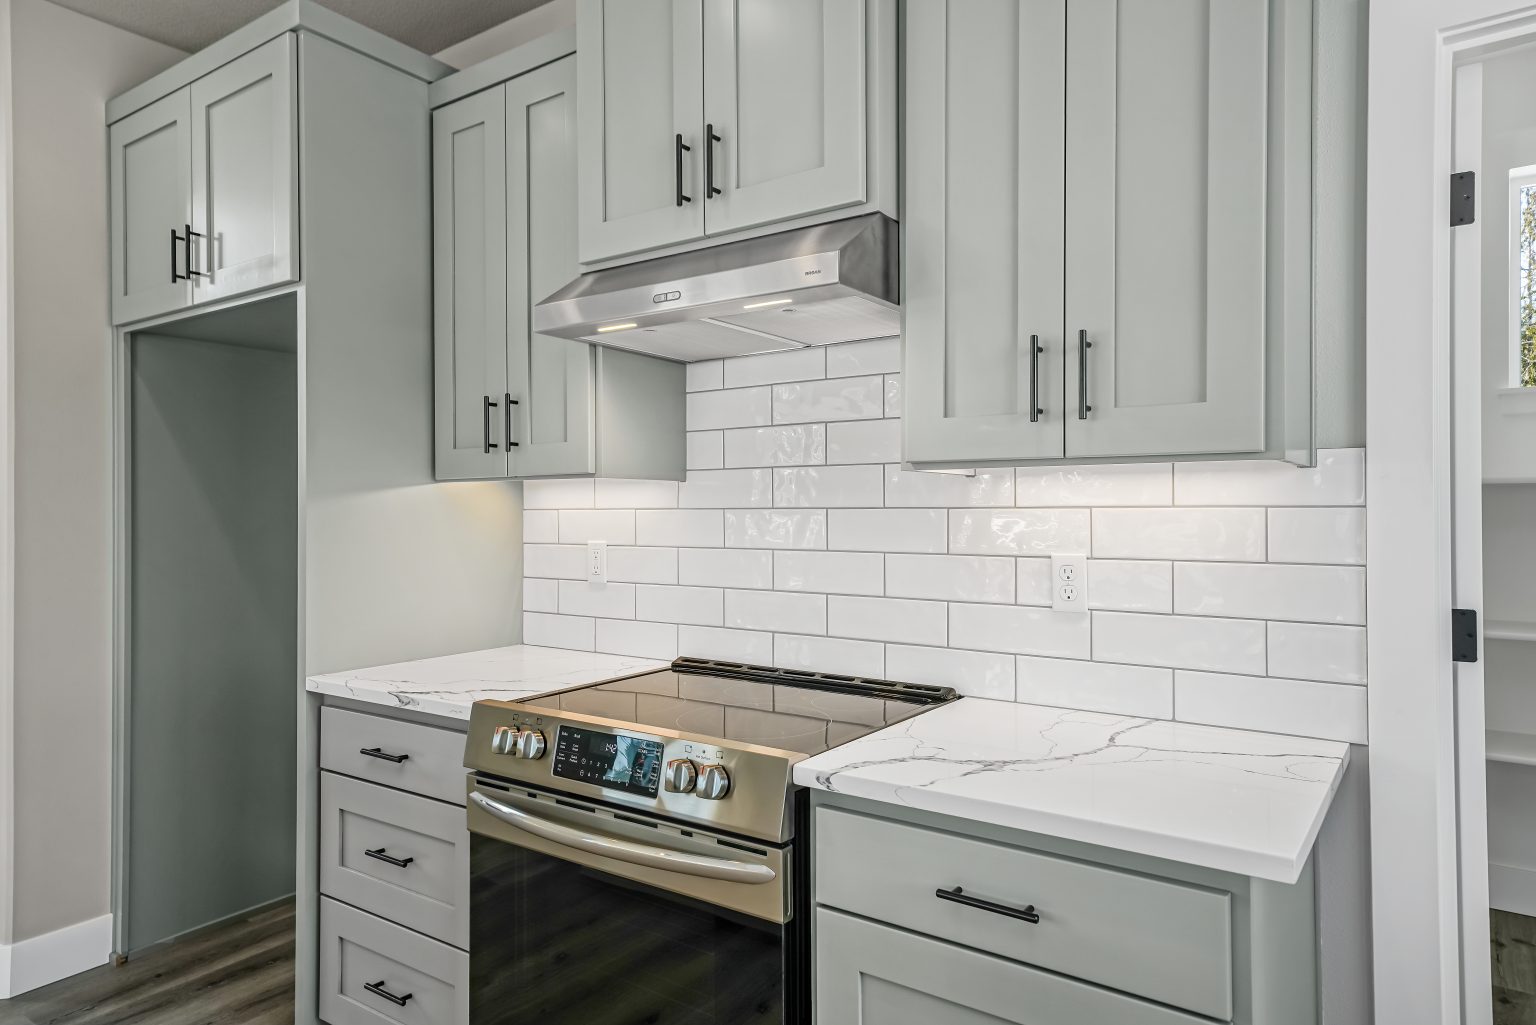 kitchen with greenish gray cabinets, stainless steel appliances, white brick-looking tile backsplash, and white marble counters with gray veining